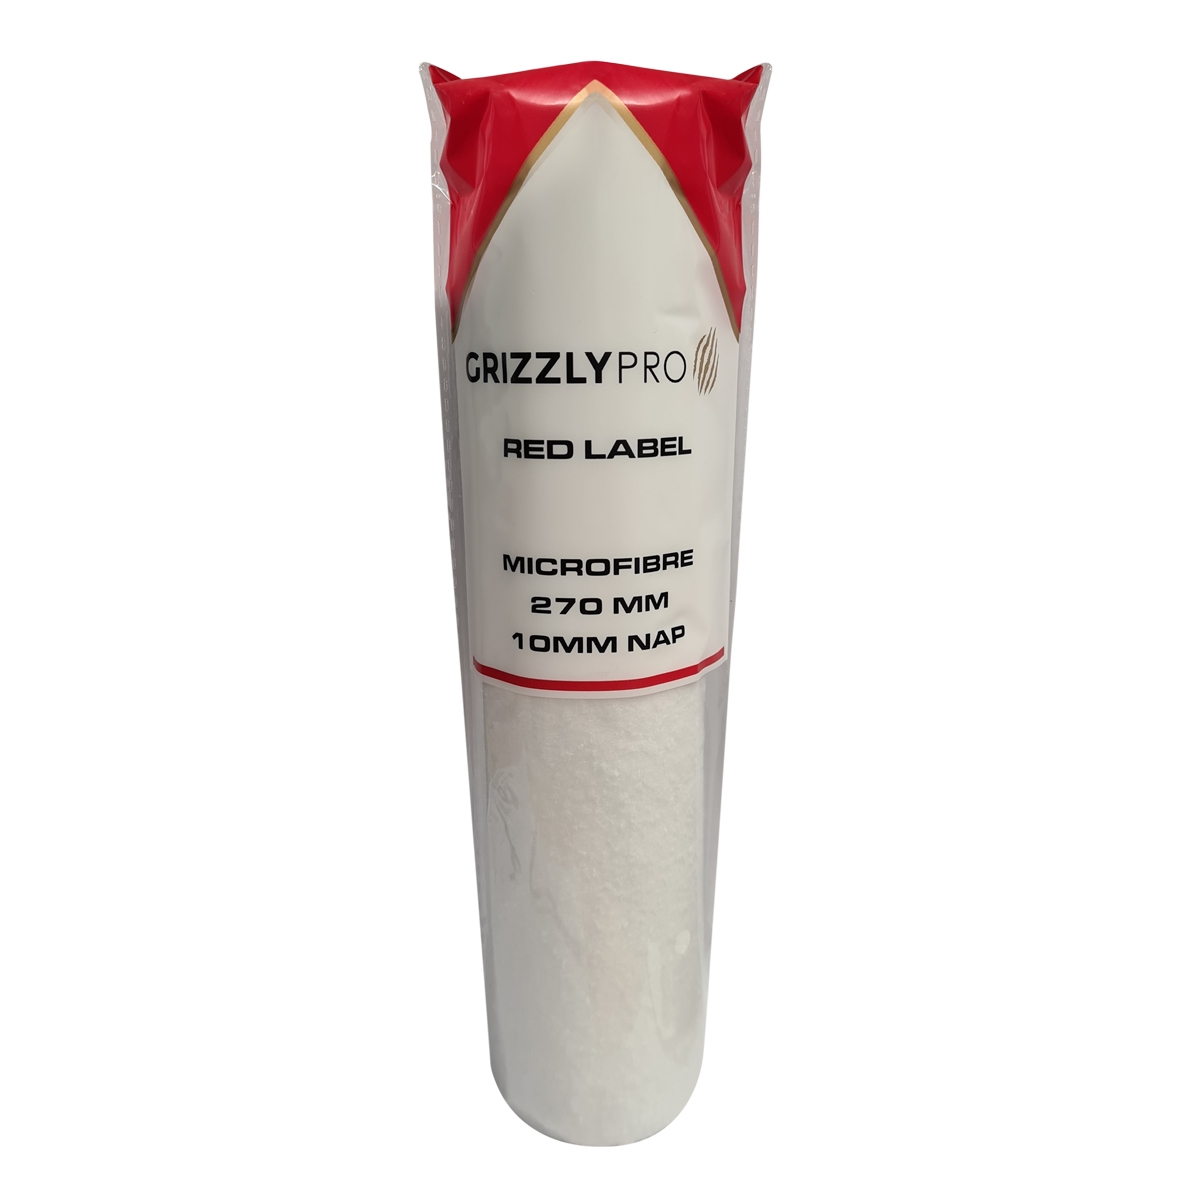 Grizzly Pro Microfibre Roller Sleeve 270mm x 10mm